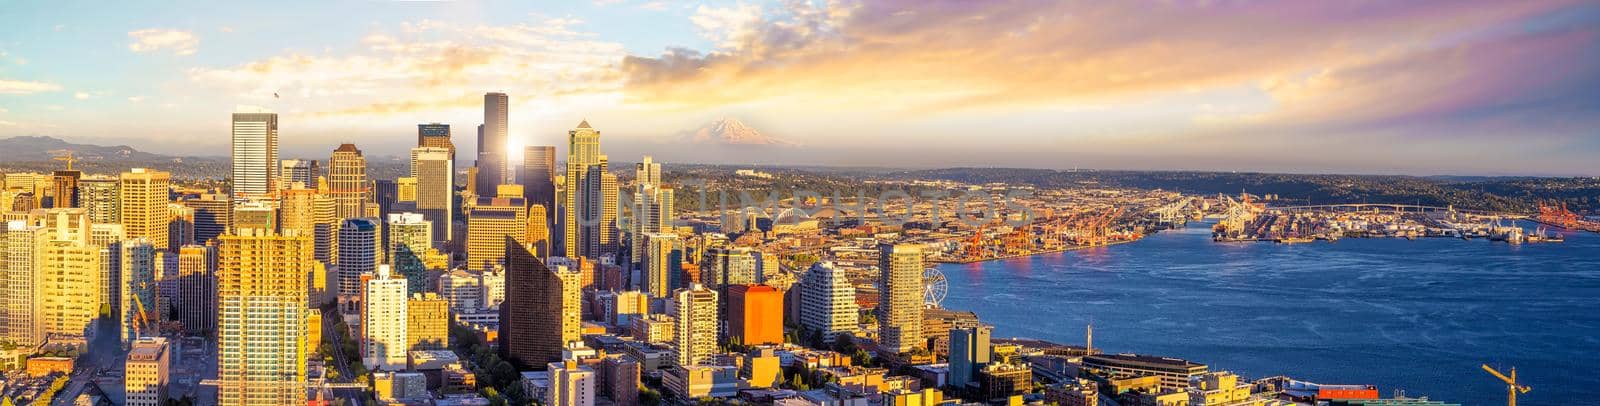 Seattle city downtown skyline cityscape in Washington State,  USA by f11photo